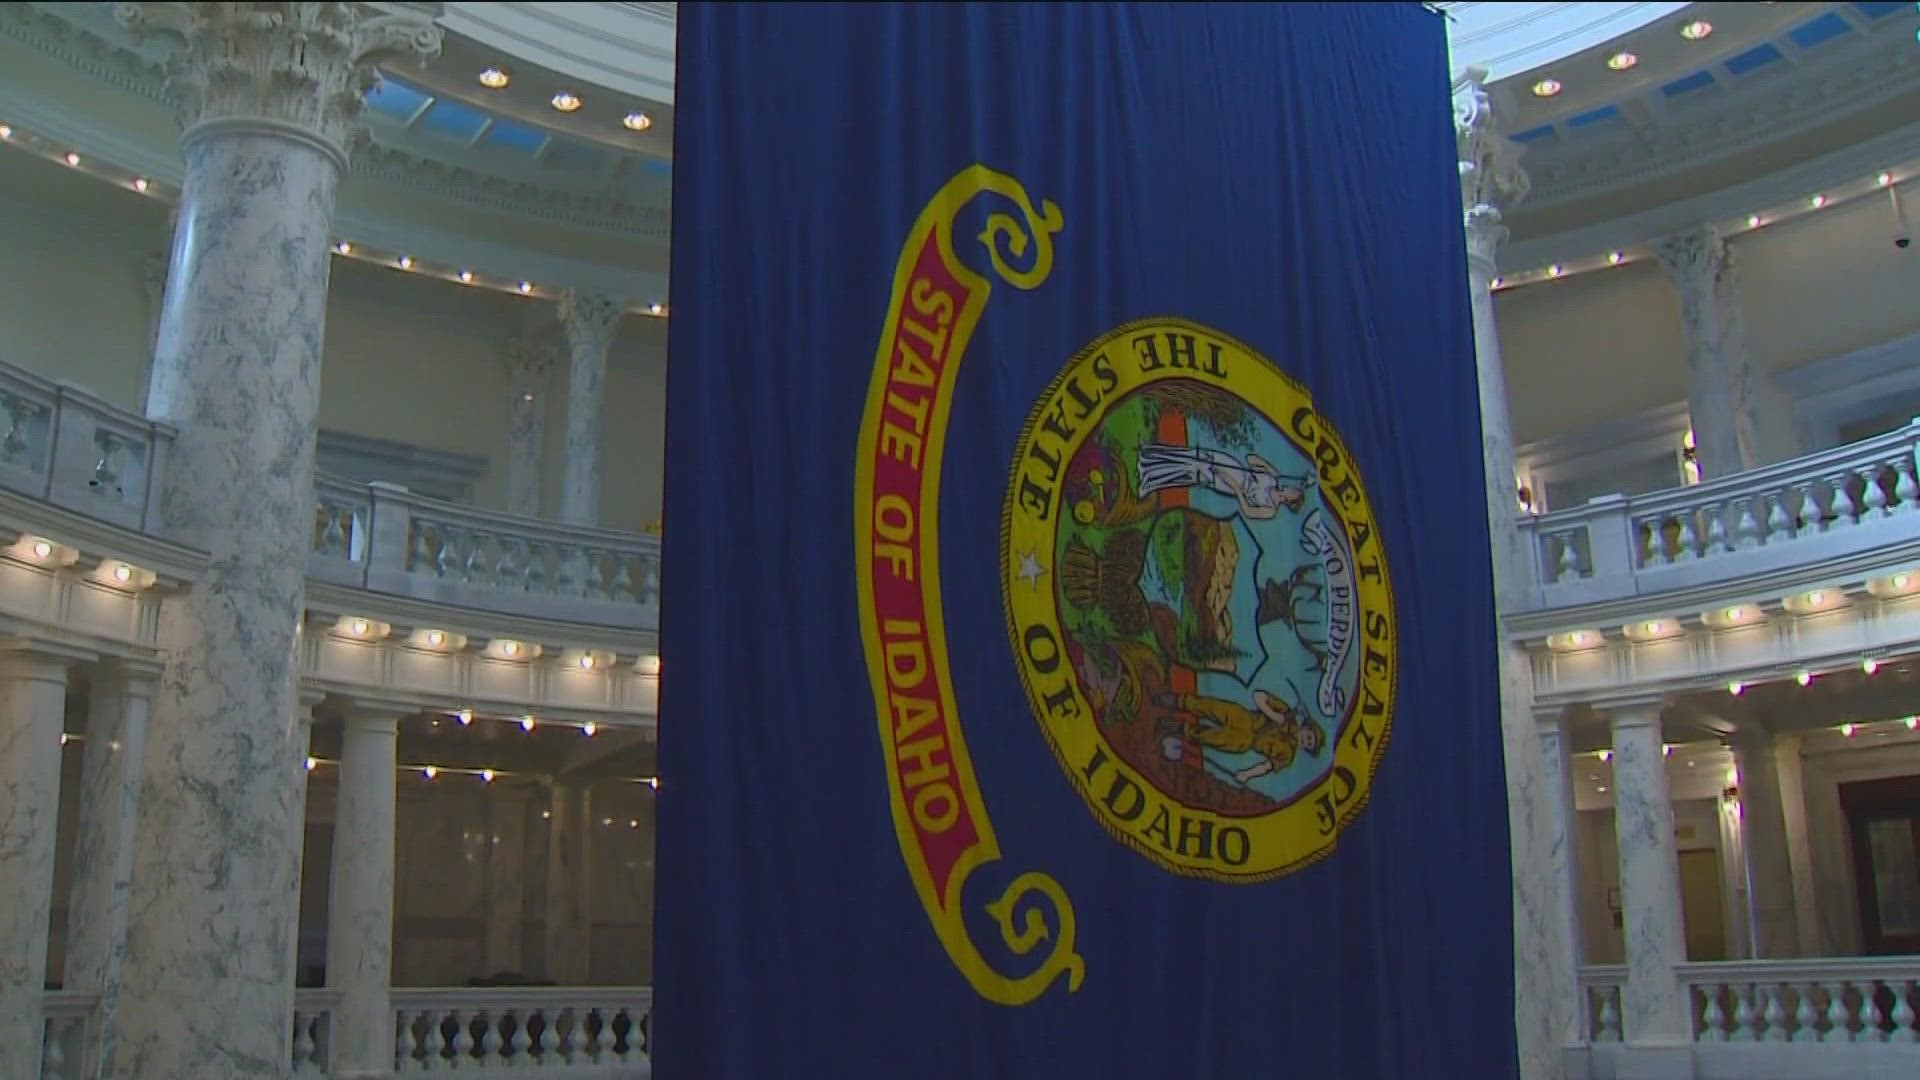 Legislators will meet to debate and vote on a package that includes tax cuts, investing in education, and another tax rebate for Idahoans to help address inflation.